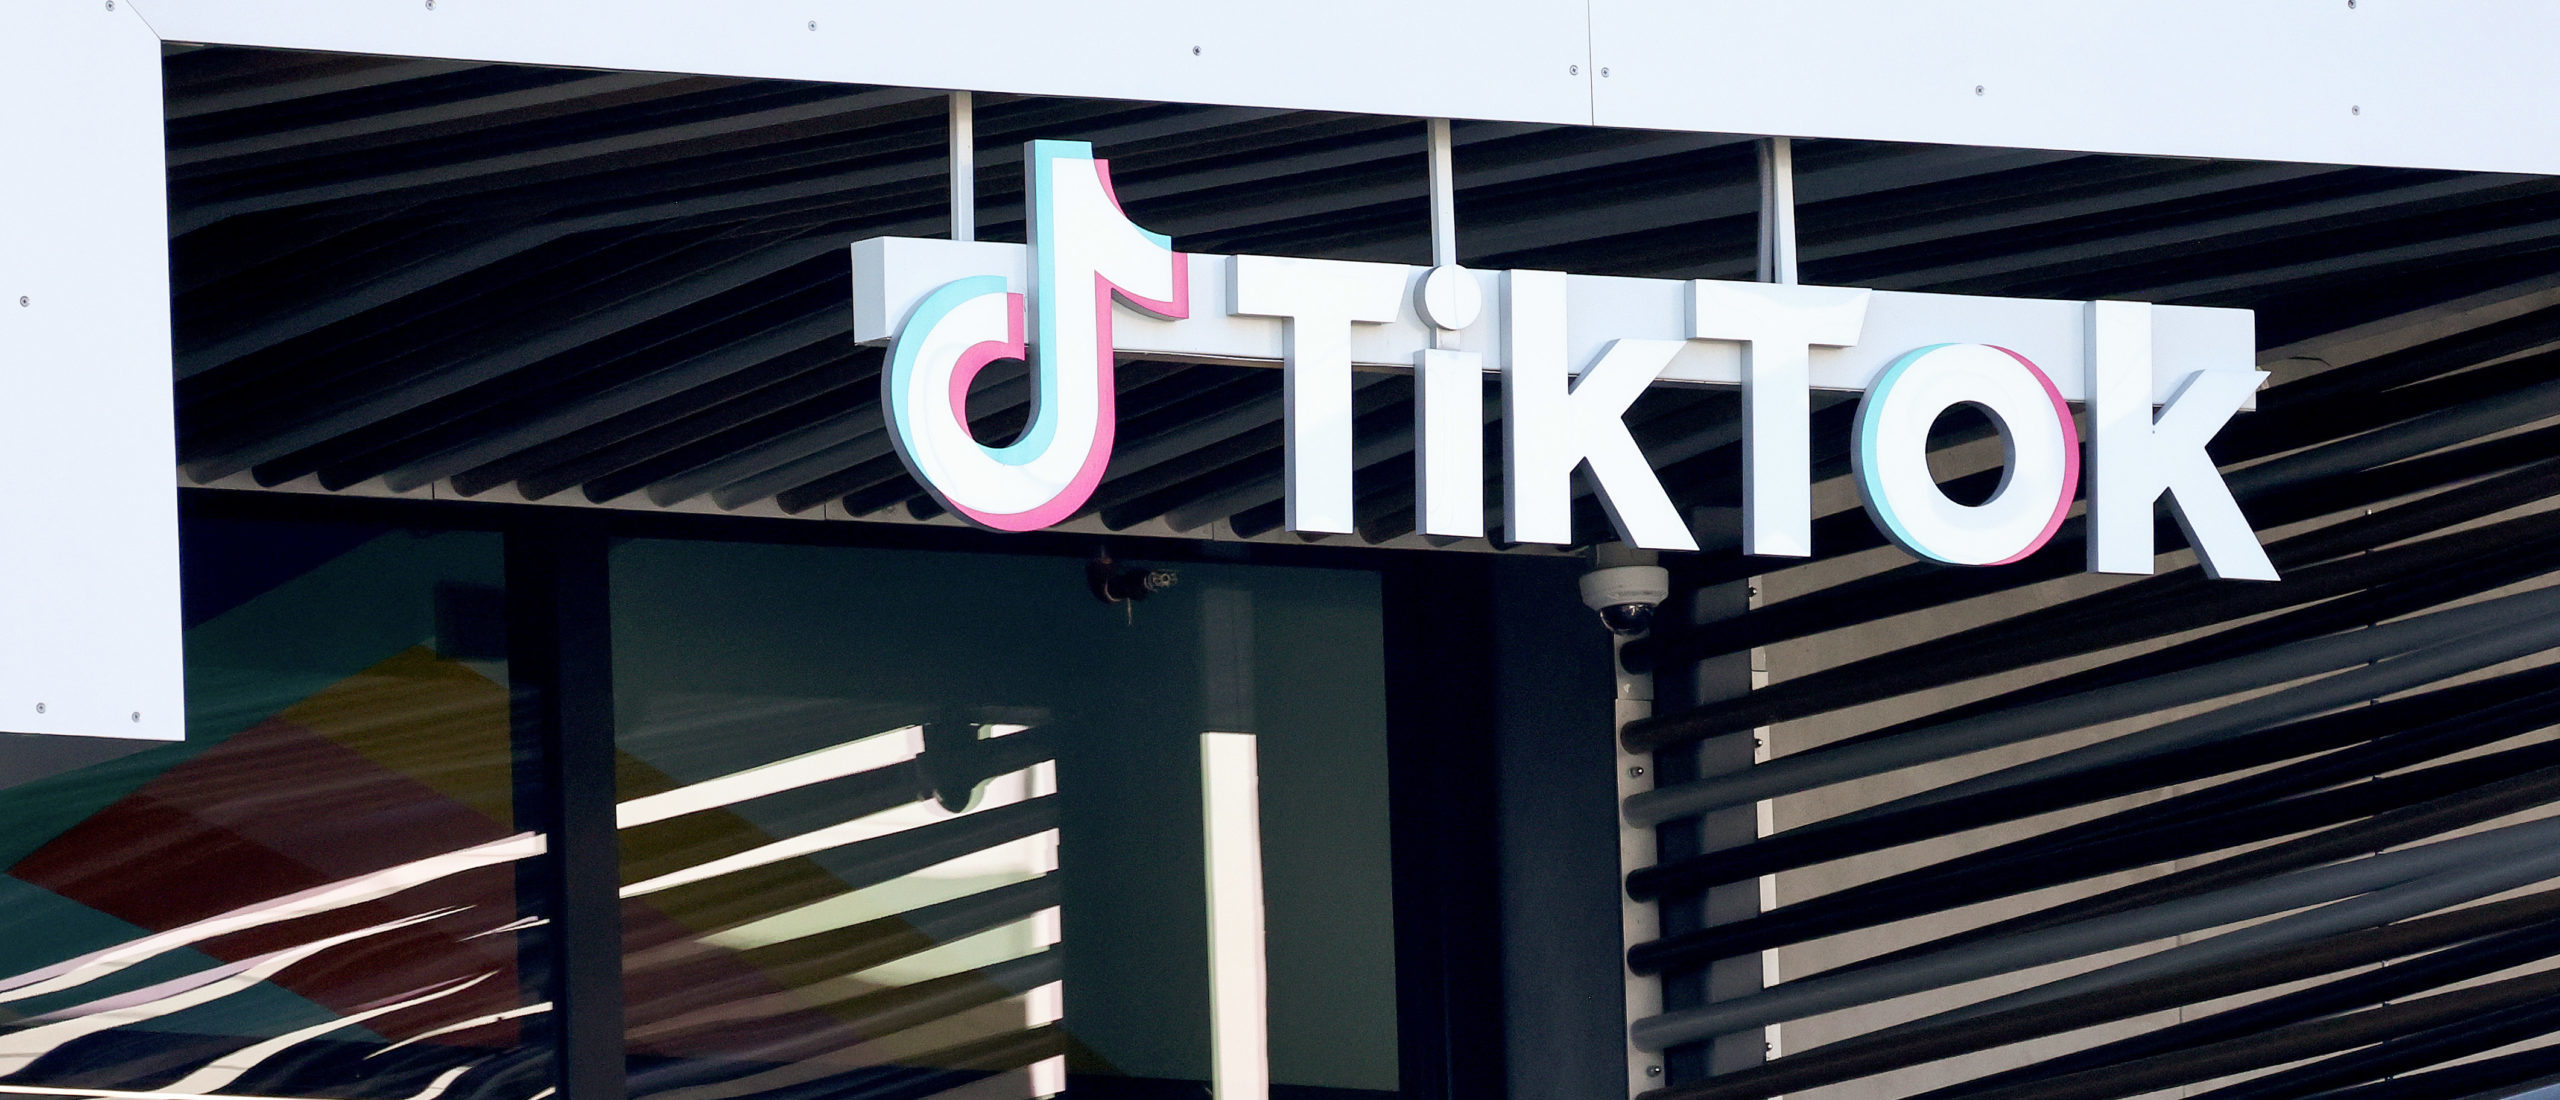 CULVER CITY, CALIFORNIA - DECEMBER 20: The TikTok logo is displayed at a TikTok office on December 20, 2022 in Culver City, California. Congress is pushing legislation to ban the popular Chinese-owned social media app from most government devices.